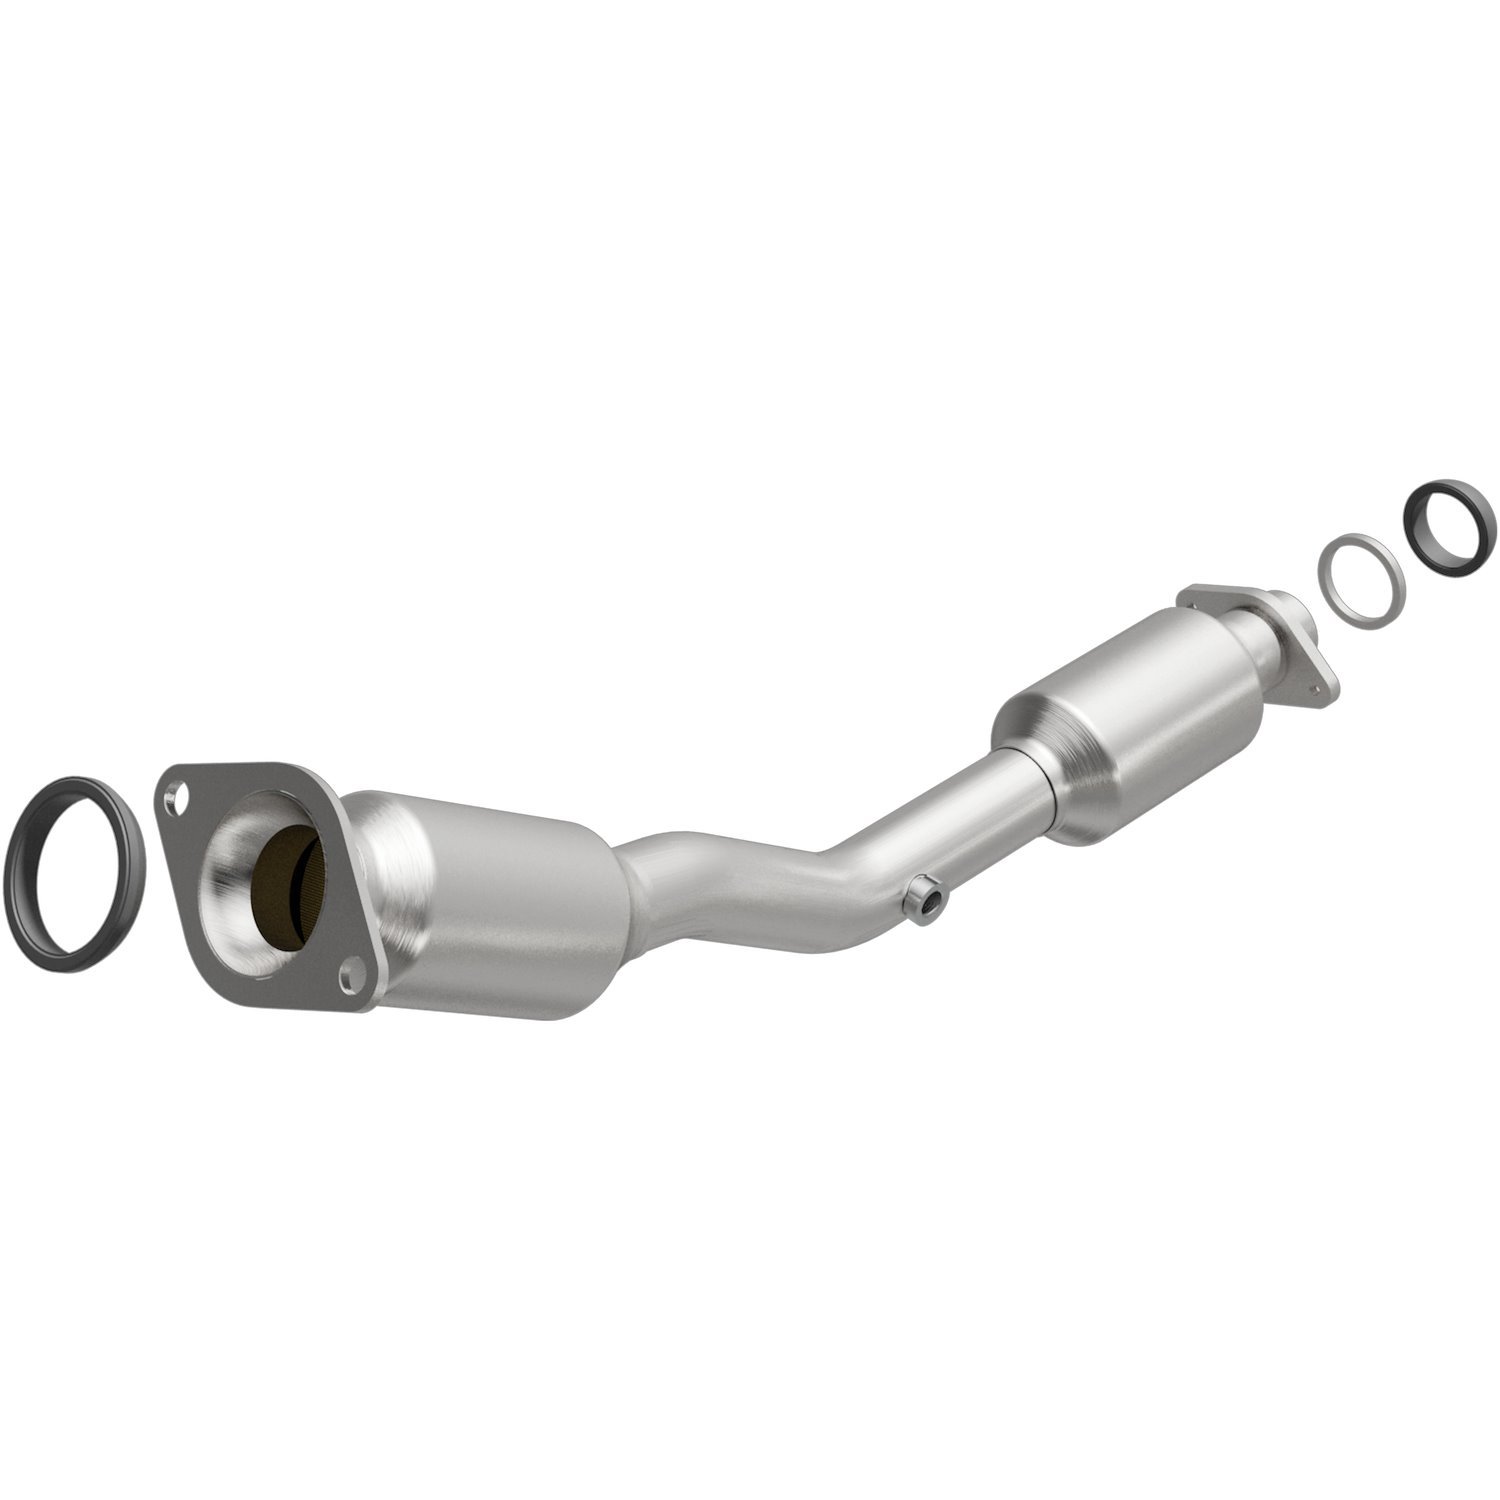 2009-2014 Nissan Cube OEM Grade Federal / EPA Compliant Direct-Fit Catalytic Converter